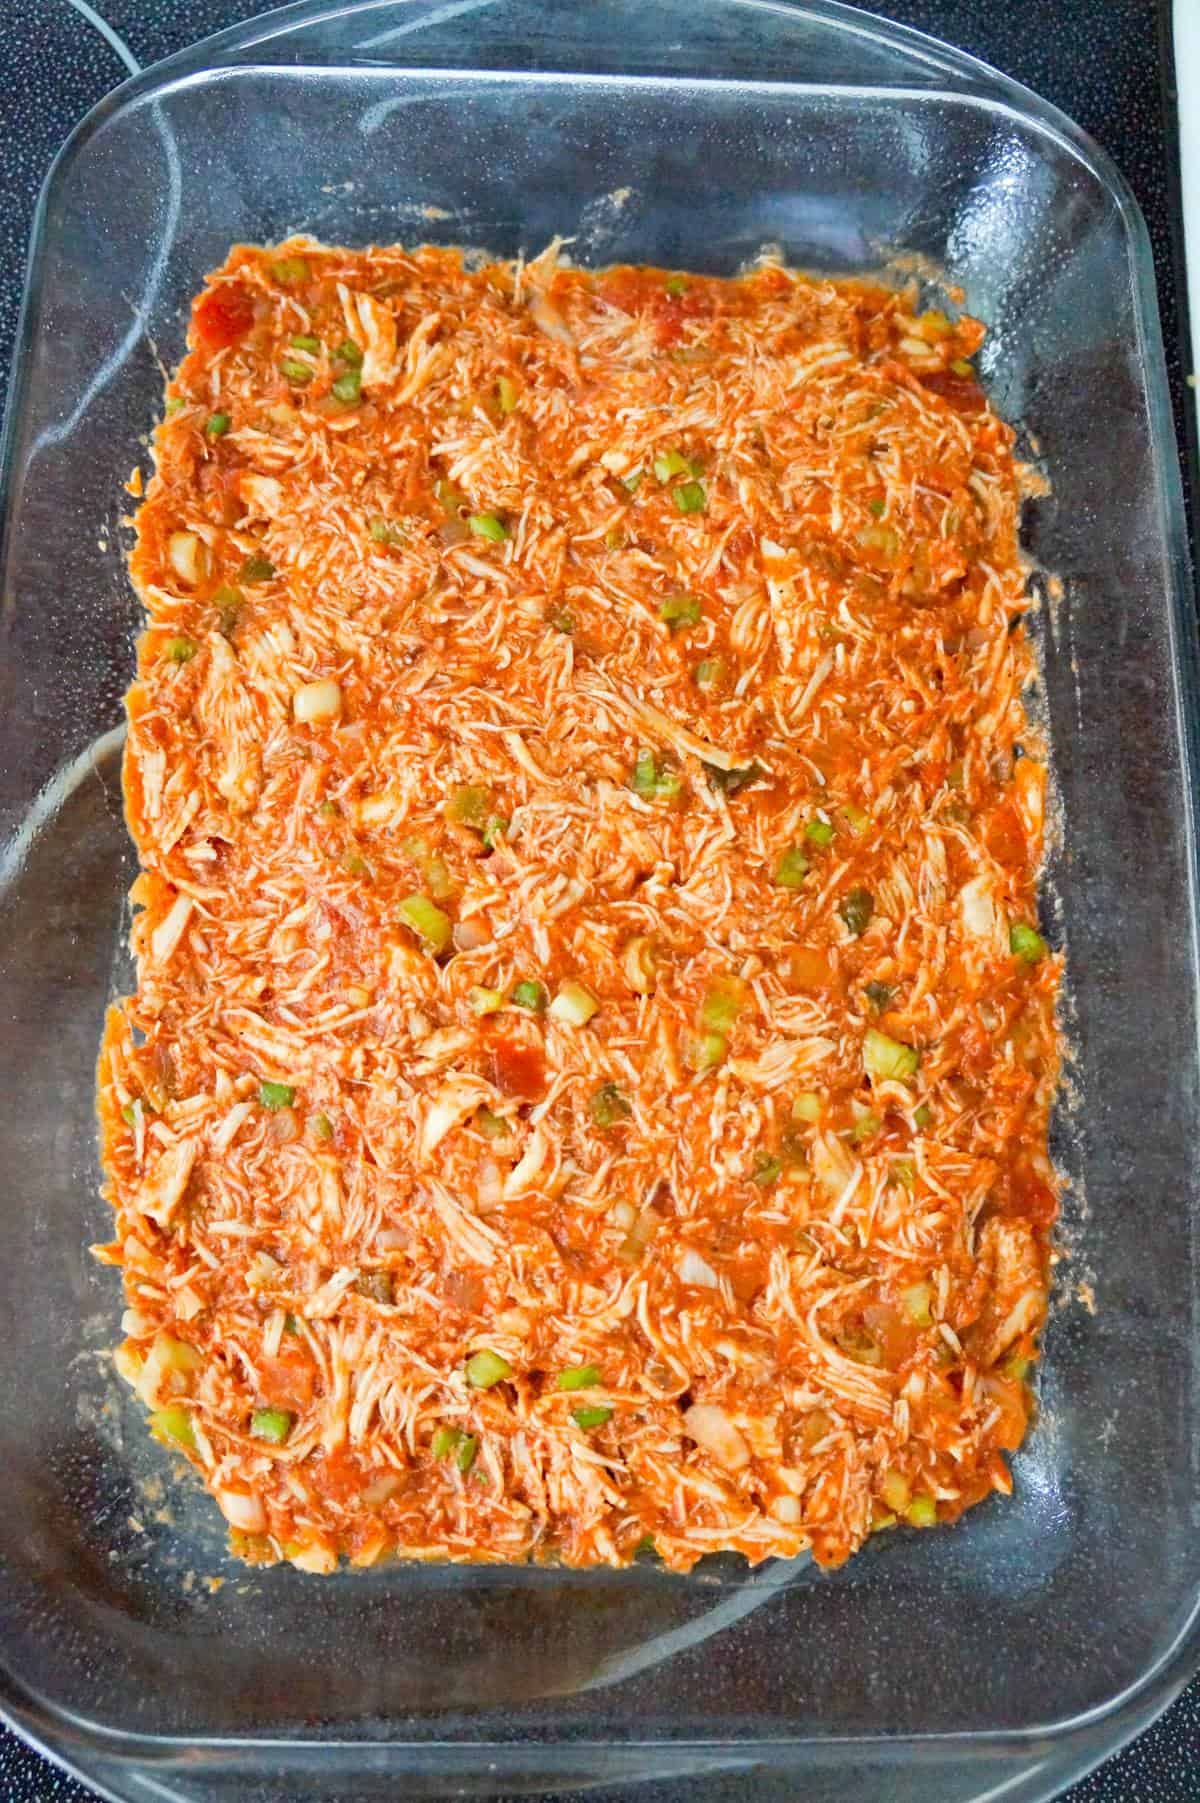 salsa and shredded chicken mixture in a baking dish